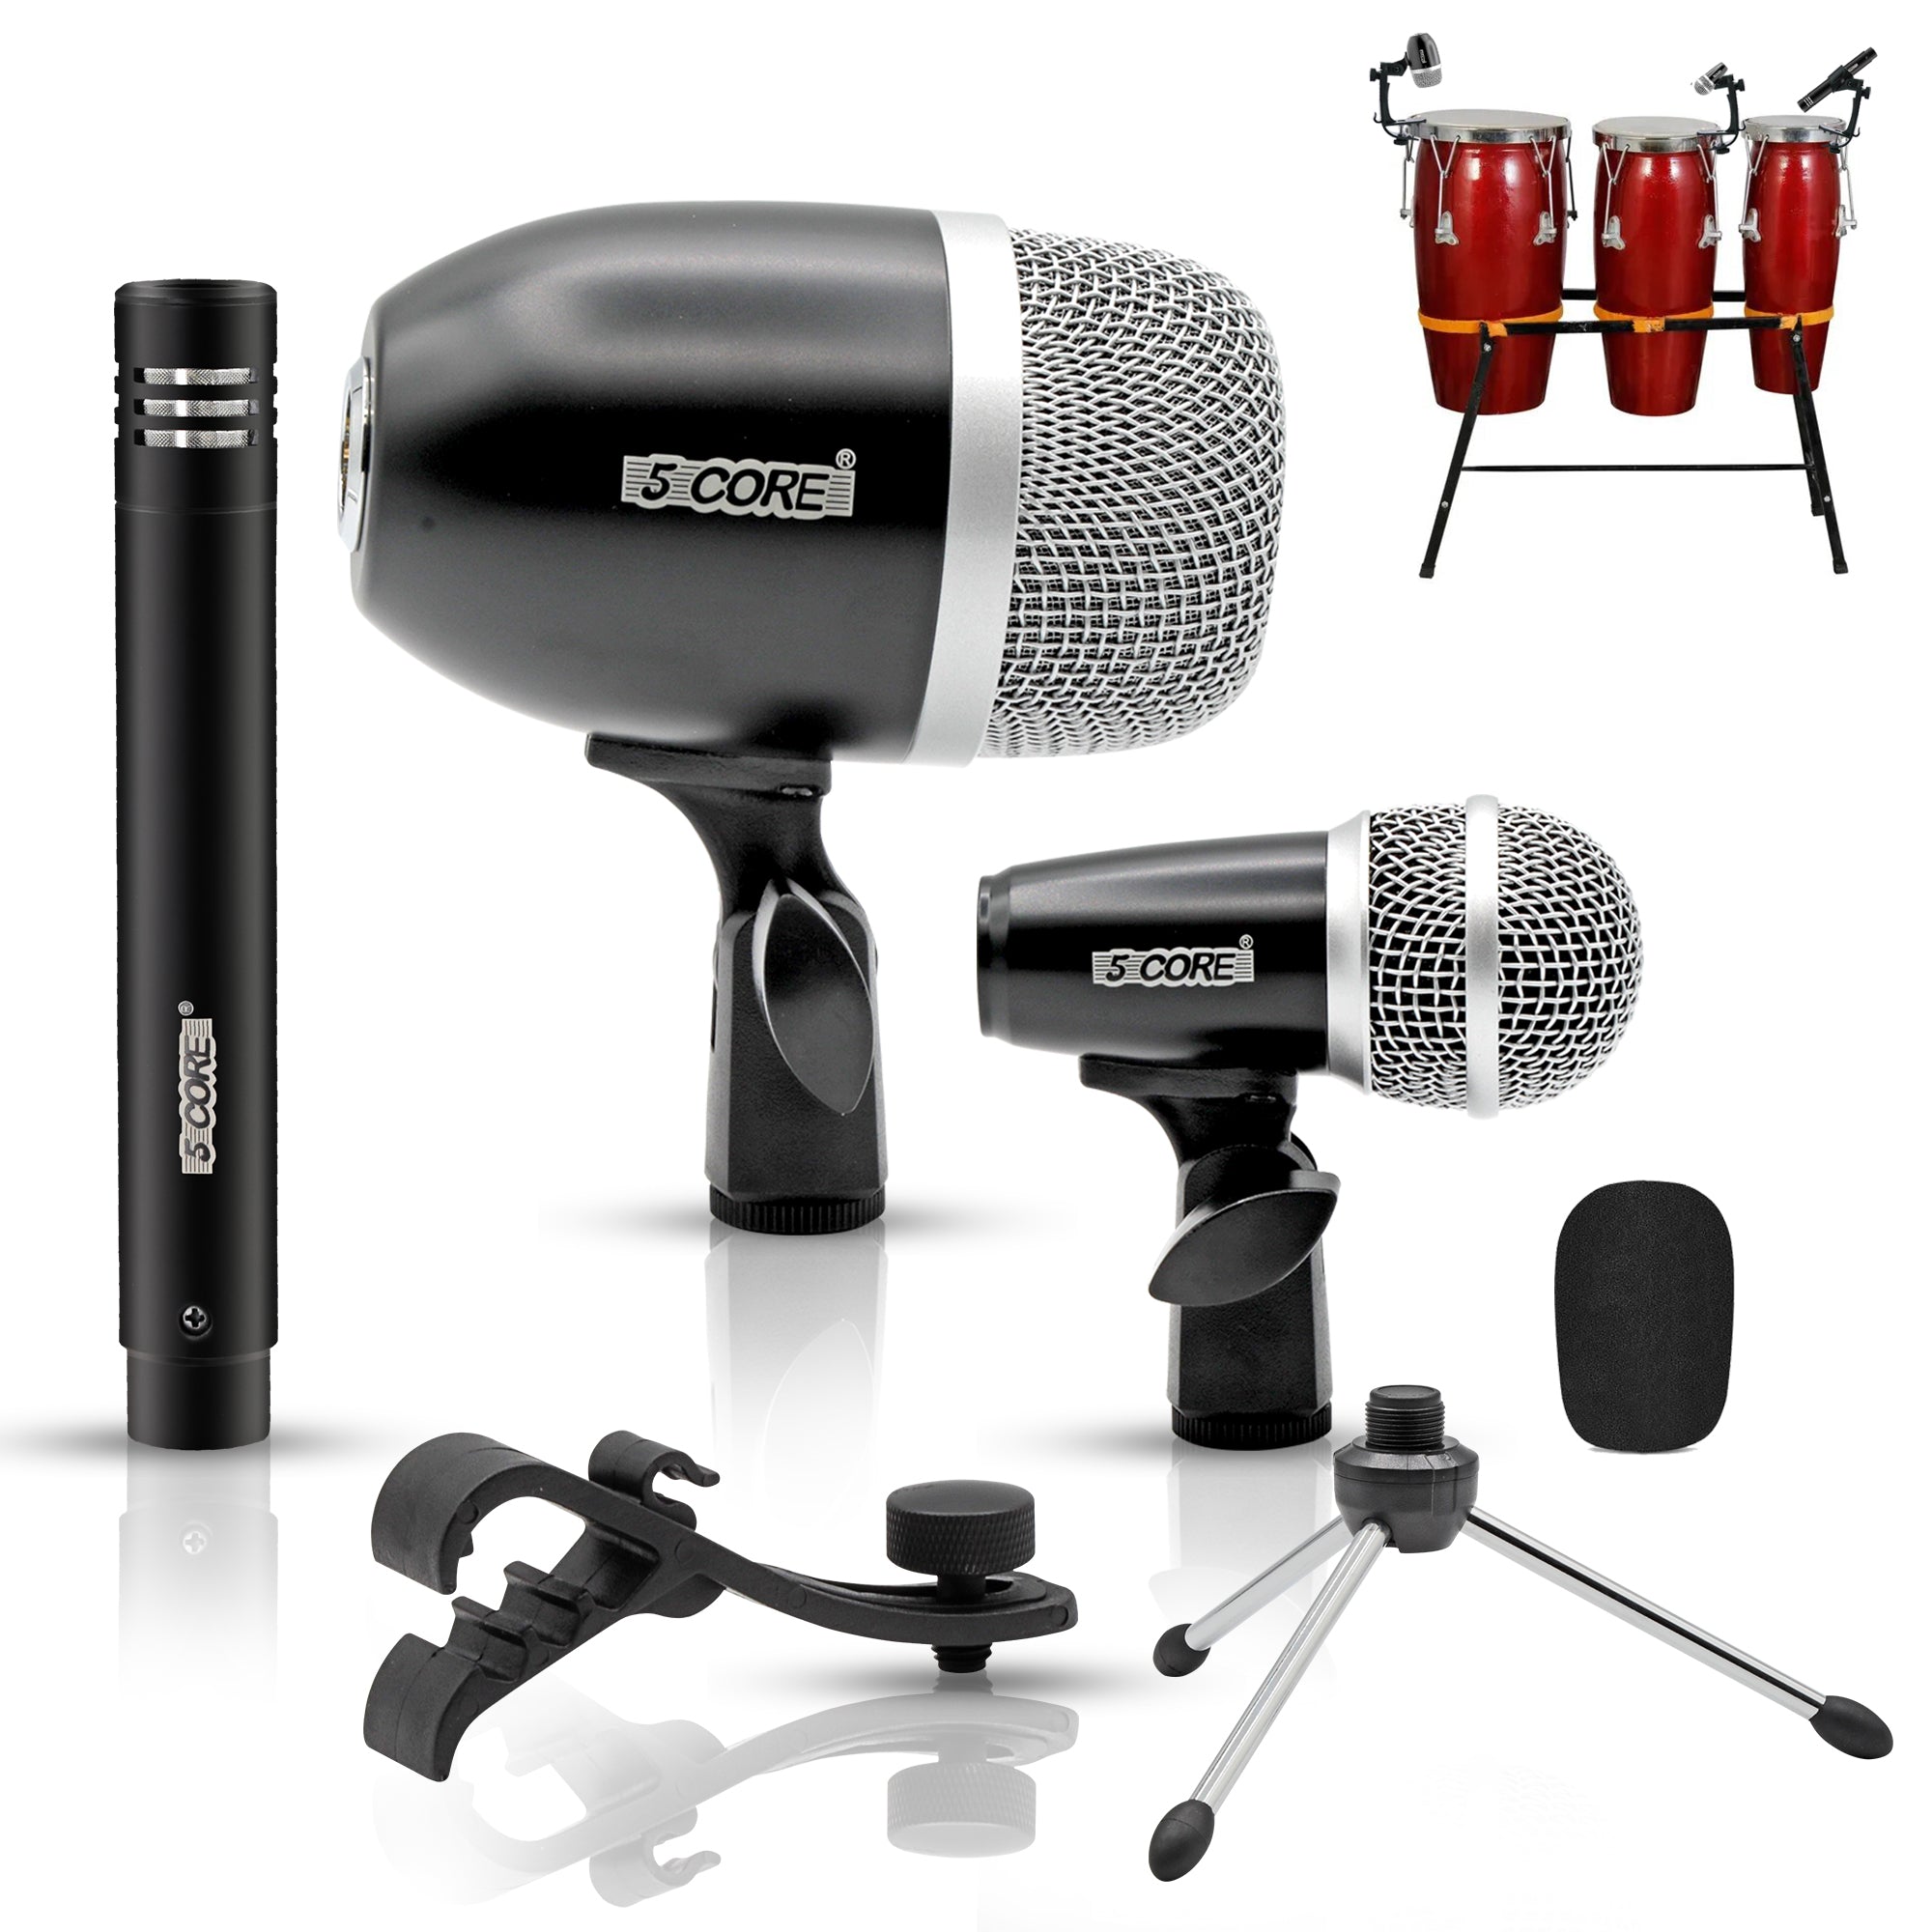 5 Core Congo Tom Snare Microphone Set Unidirectional Cardioid Dynamic Instrument Metal Drum Mic